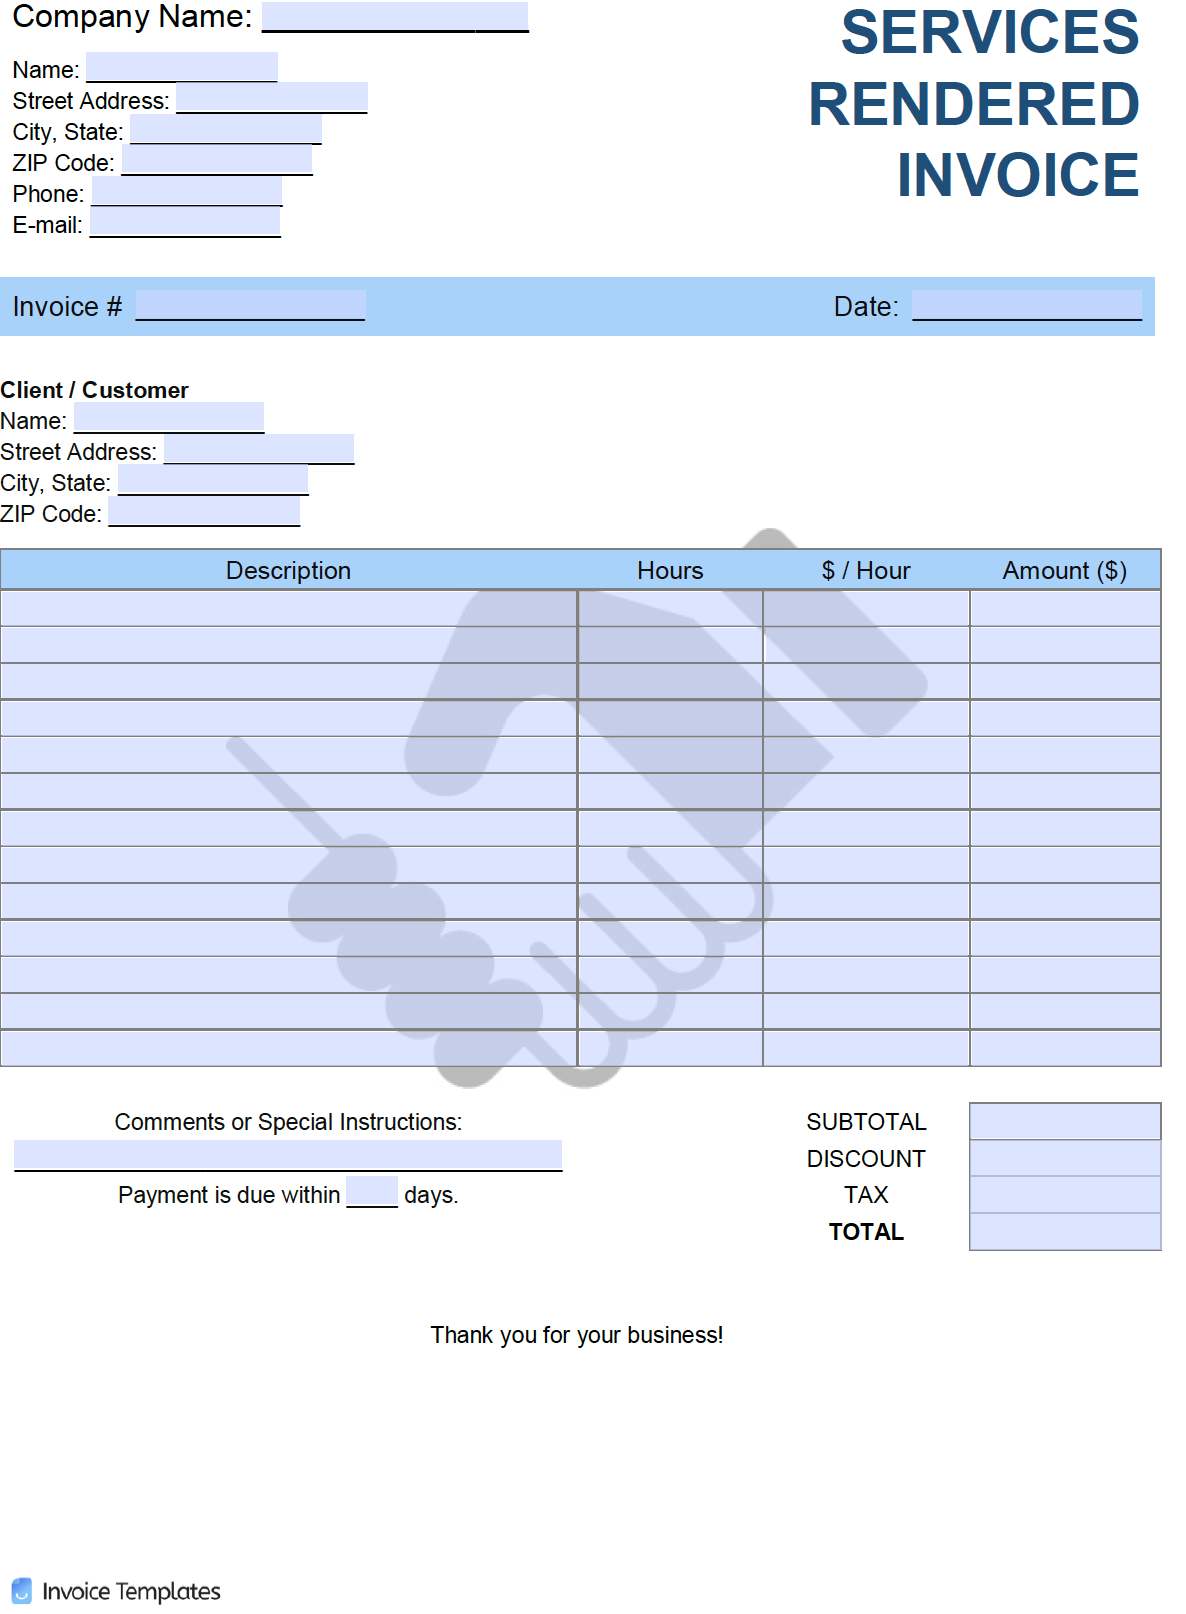 Free Services Rendered Invoice Template  PDF  WORD  EXCEL In Template Of Invoice For Services Rendered